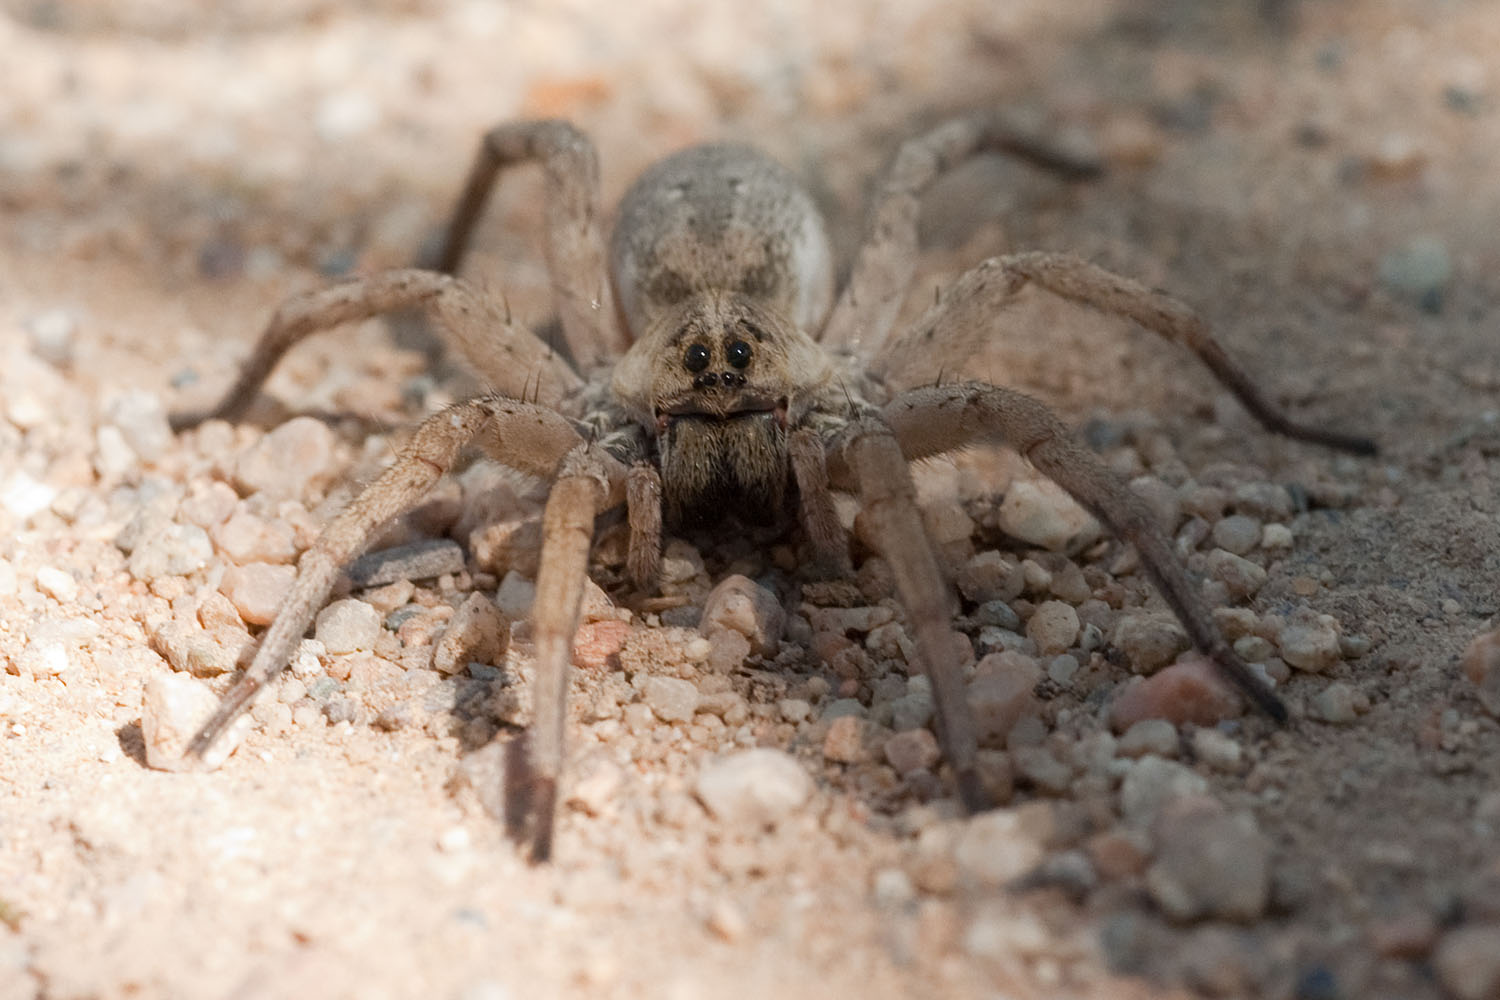 a large, brown spider walking across a pile of sand